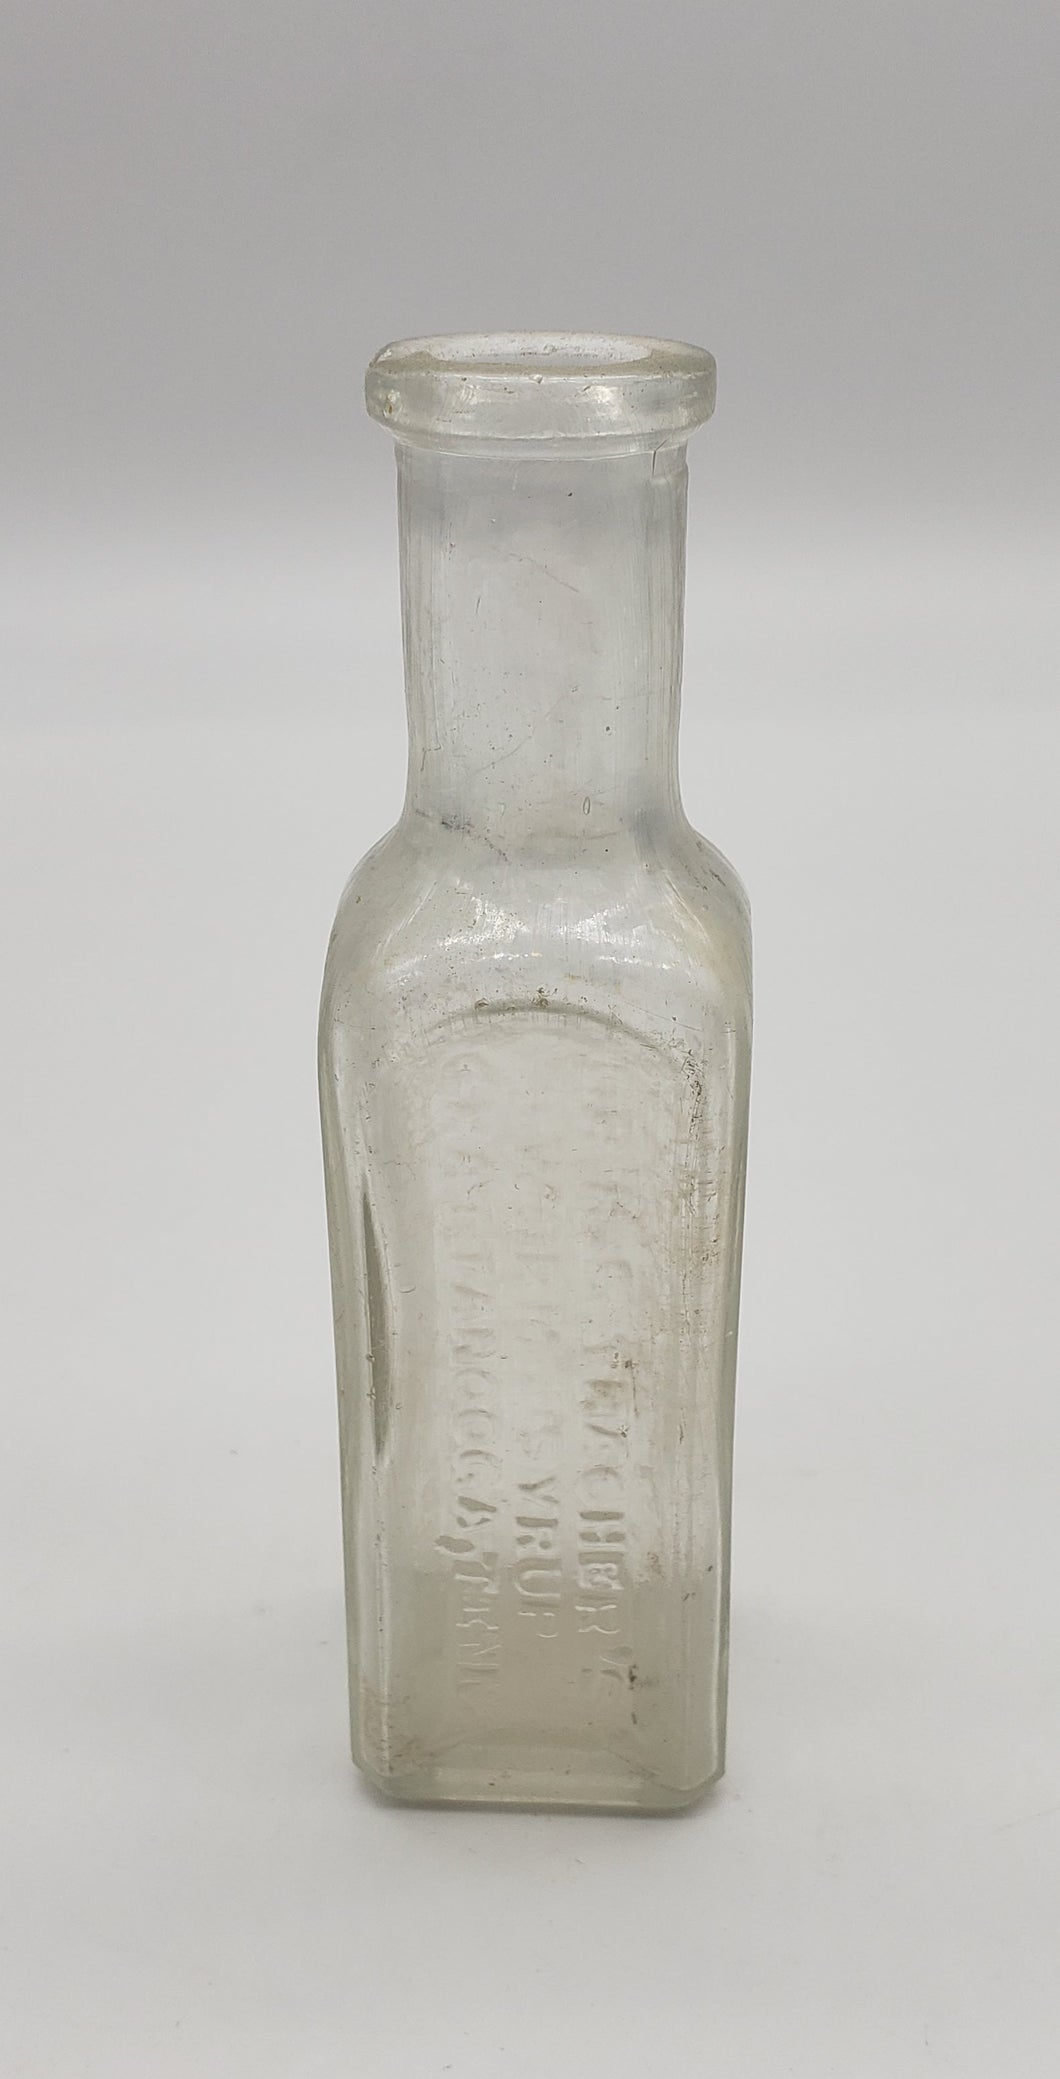 Dr H.S. Thacher's Worm Syrup glass bottle